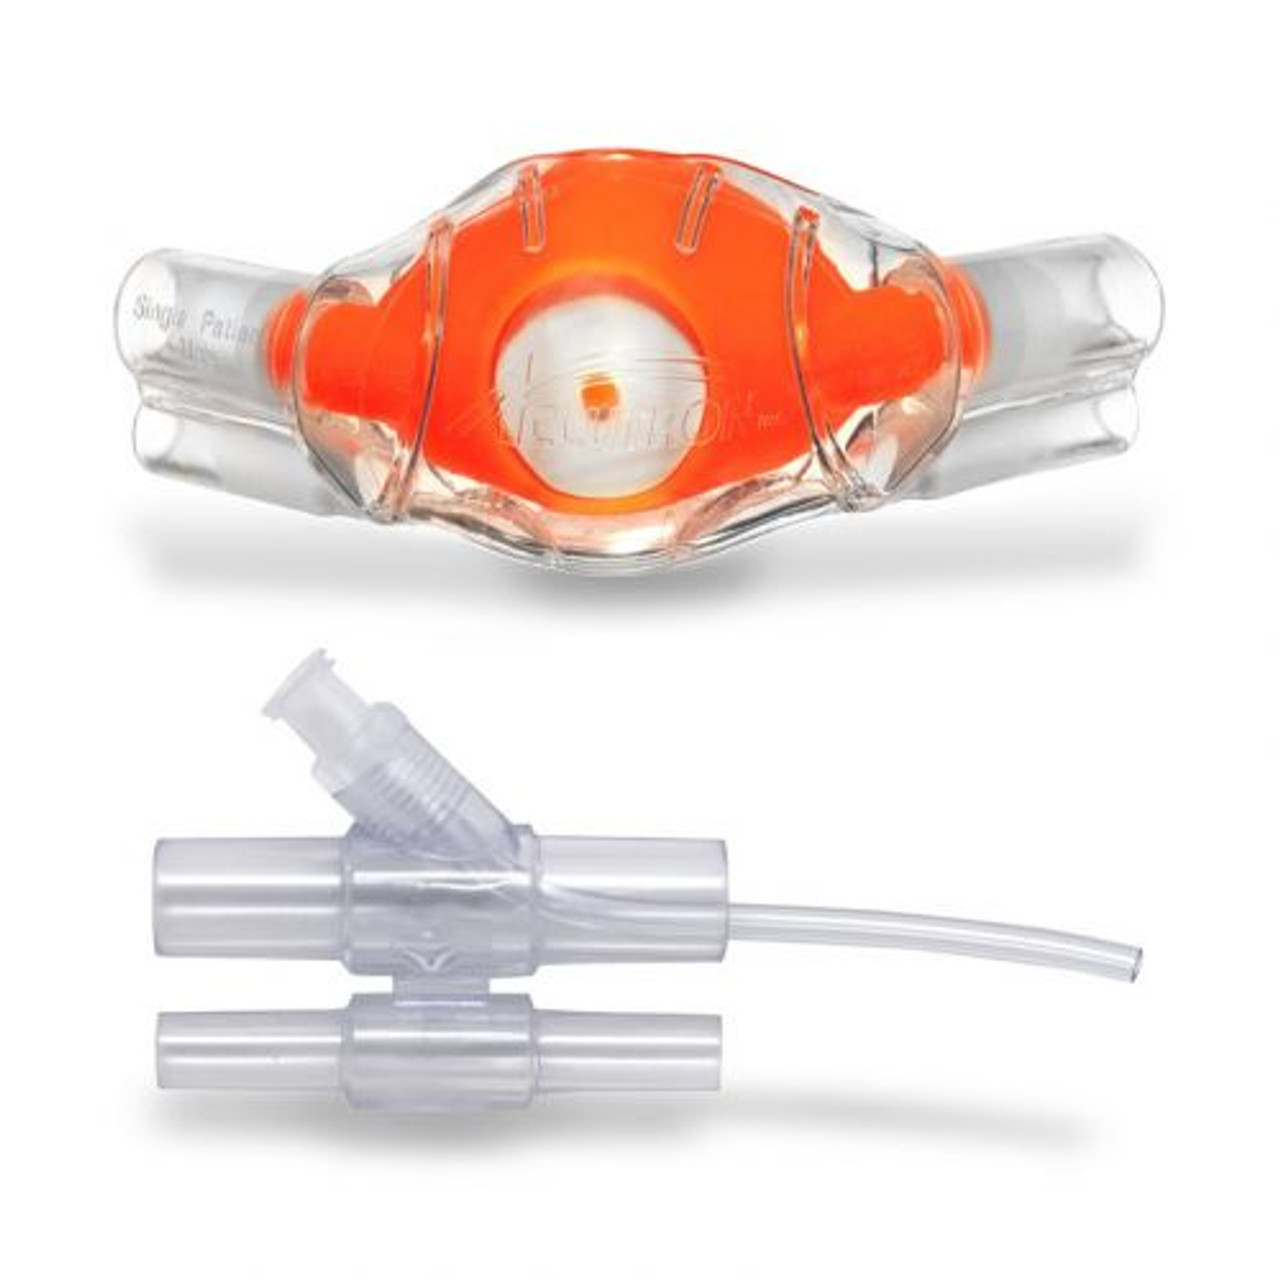 Crosstex Accutron Clearview Nasal Masks and Capnography Bundle, Pediatric, Outlaw Orange, 12/pk